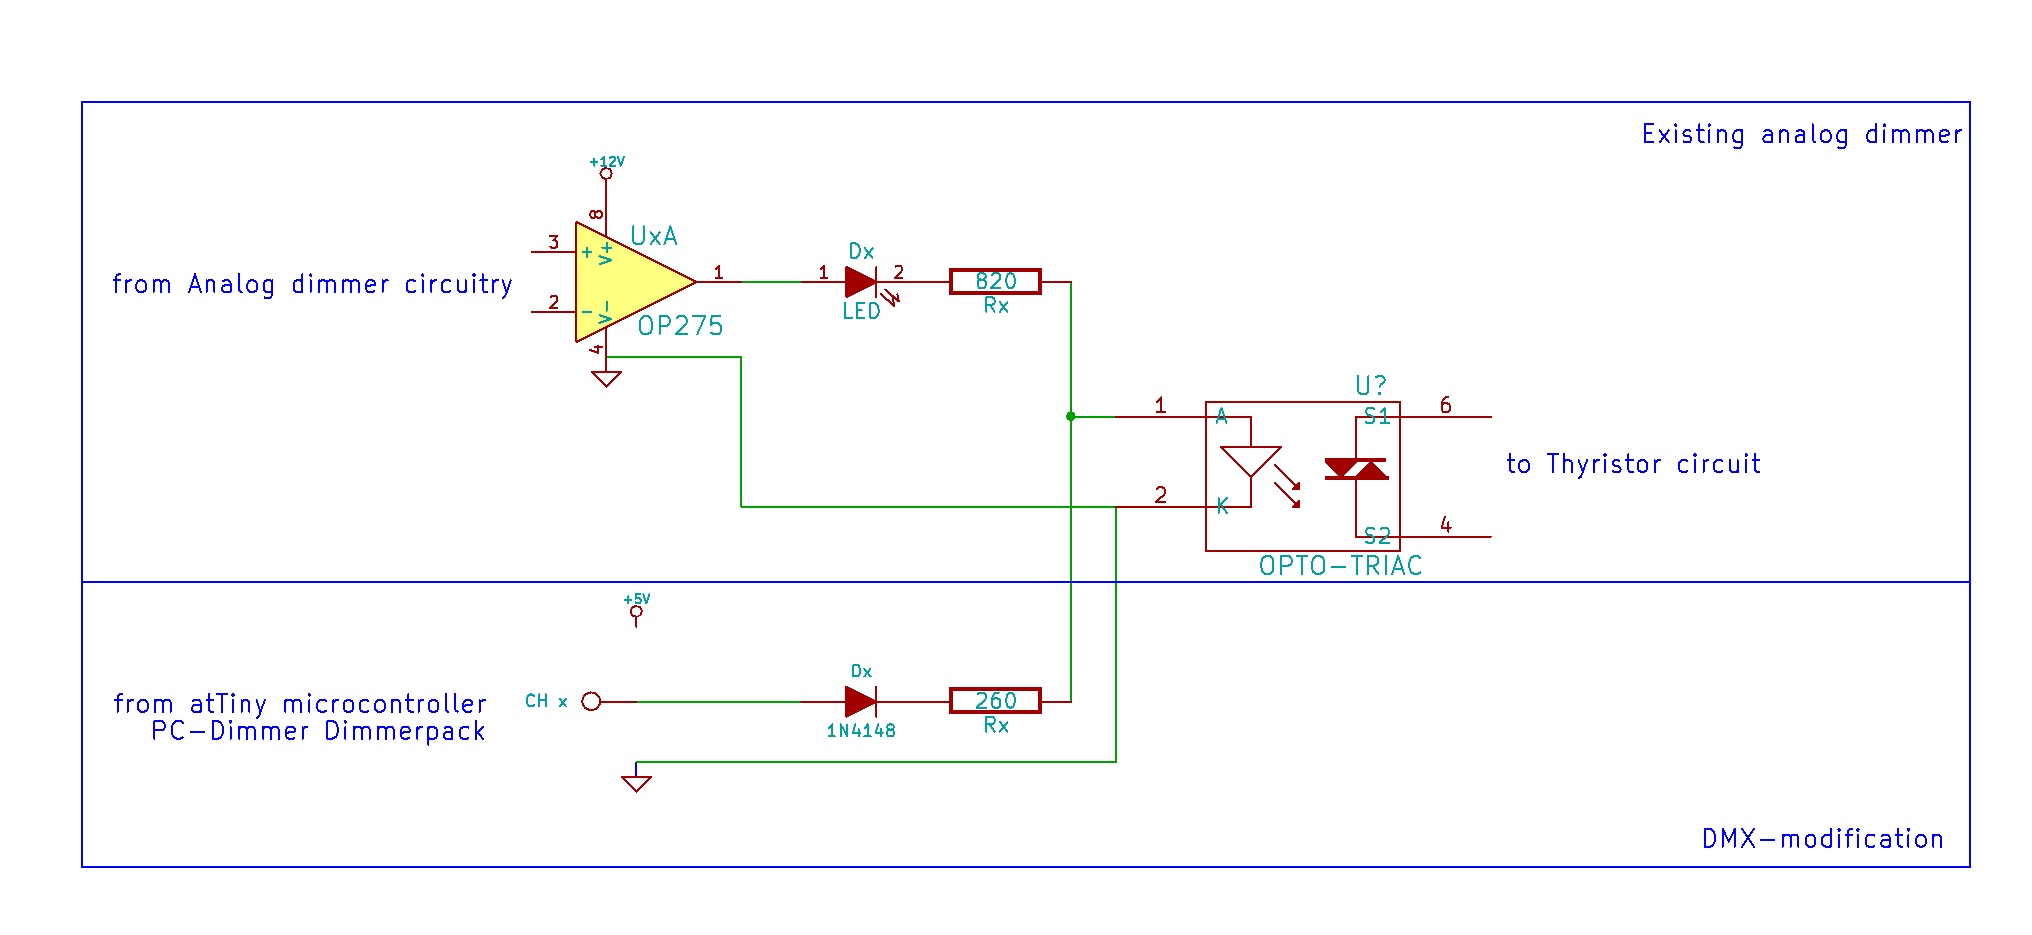 adaptation of analog dimmer to DMX-capable